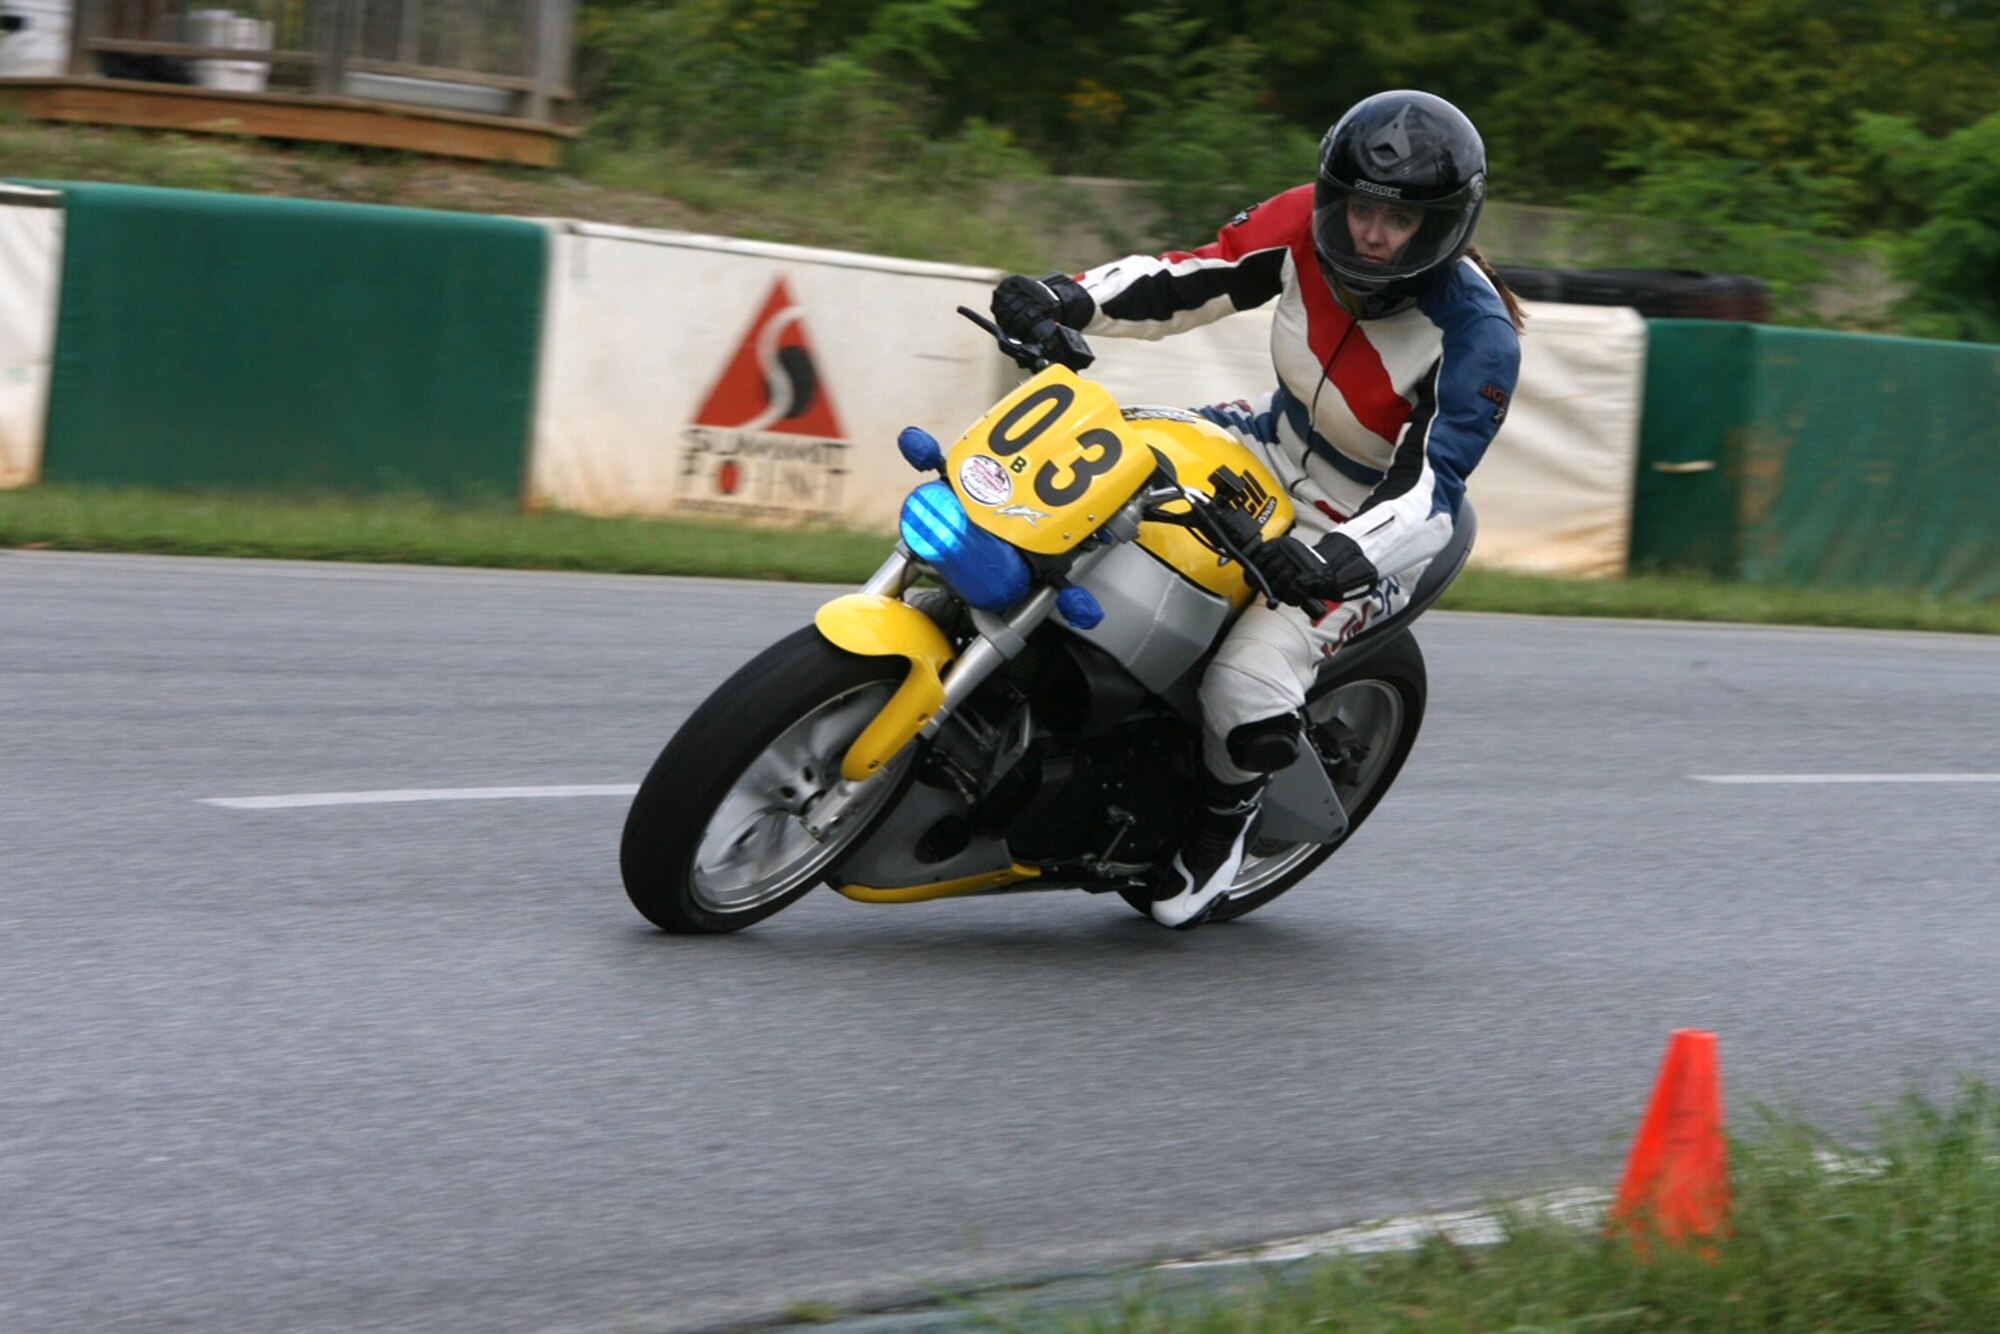 SUMMIT POINT, W. Va. – Senior Master Sgt. Marcy Broadway takes a turn at a motorcycle track in West Virginia September 2012 with her Buell 998cc Lightning streetfighter. (Courtesy photo/Released)